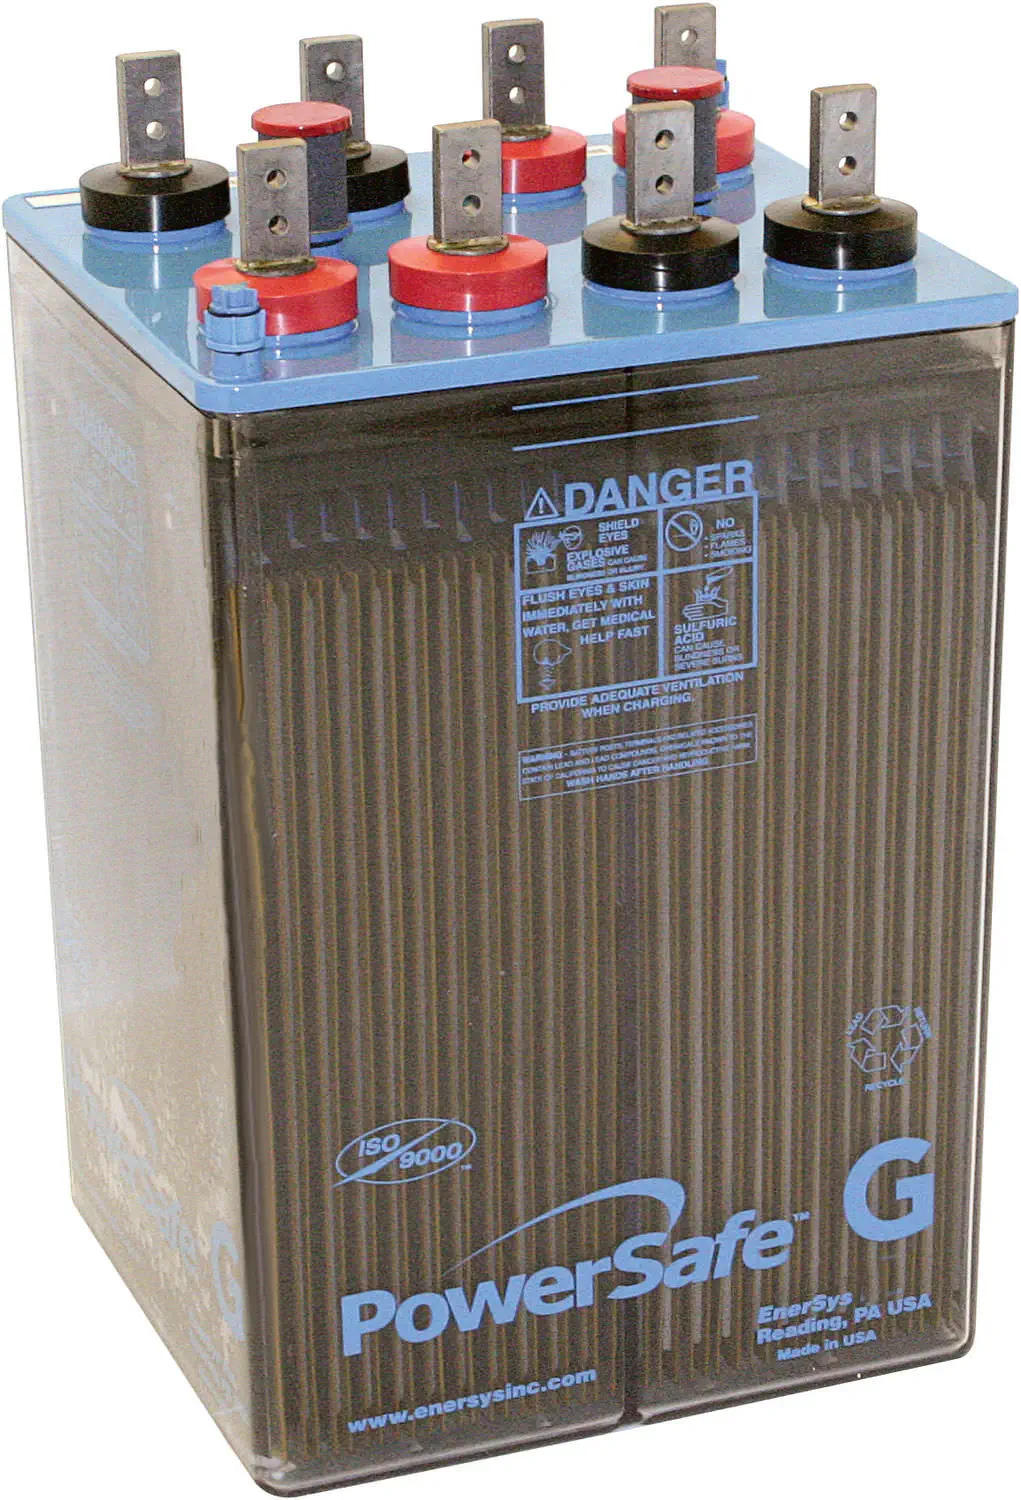 EnerSys PowerSafe GN-29